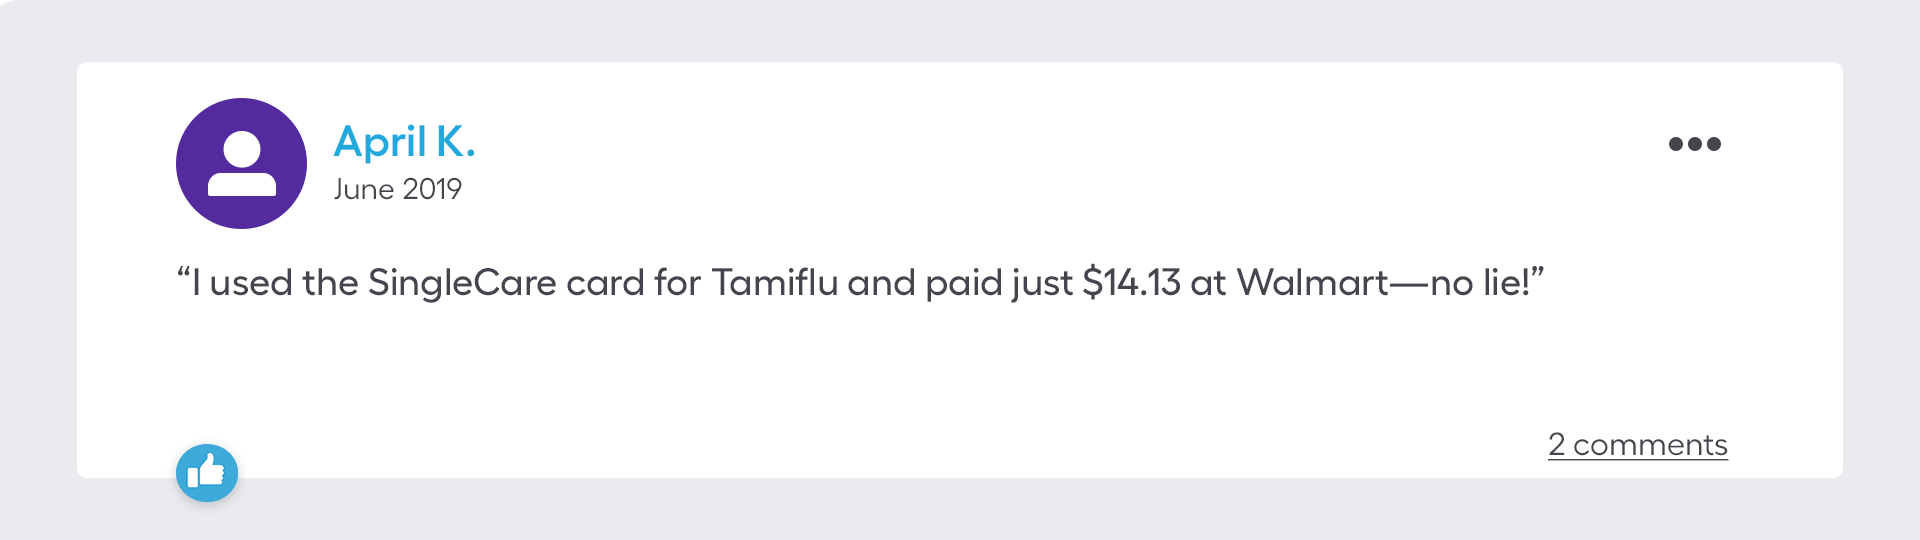 I used the SingleCare card for Tamiflu and paid just $14.13 at Walmart—no lie!